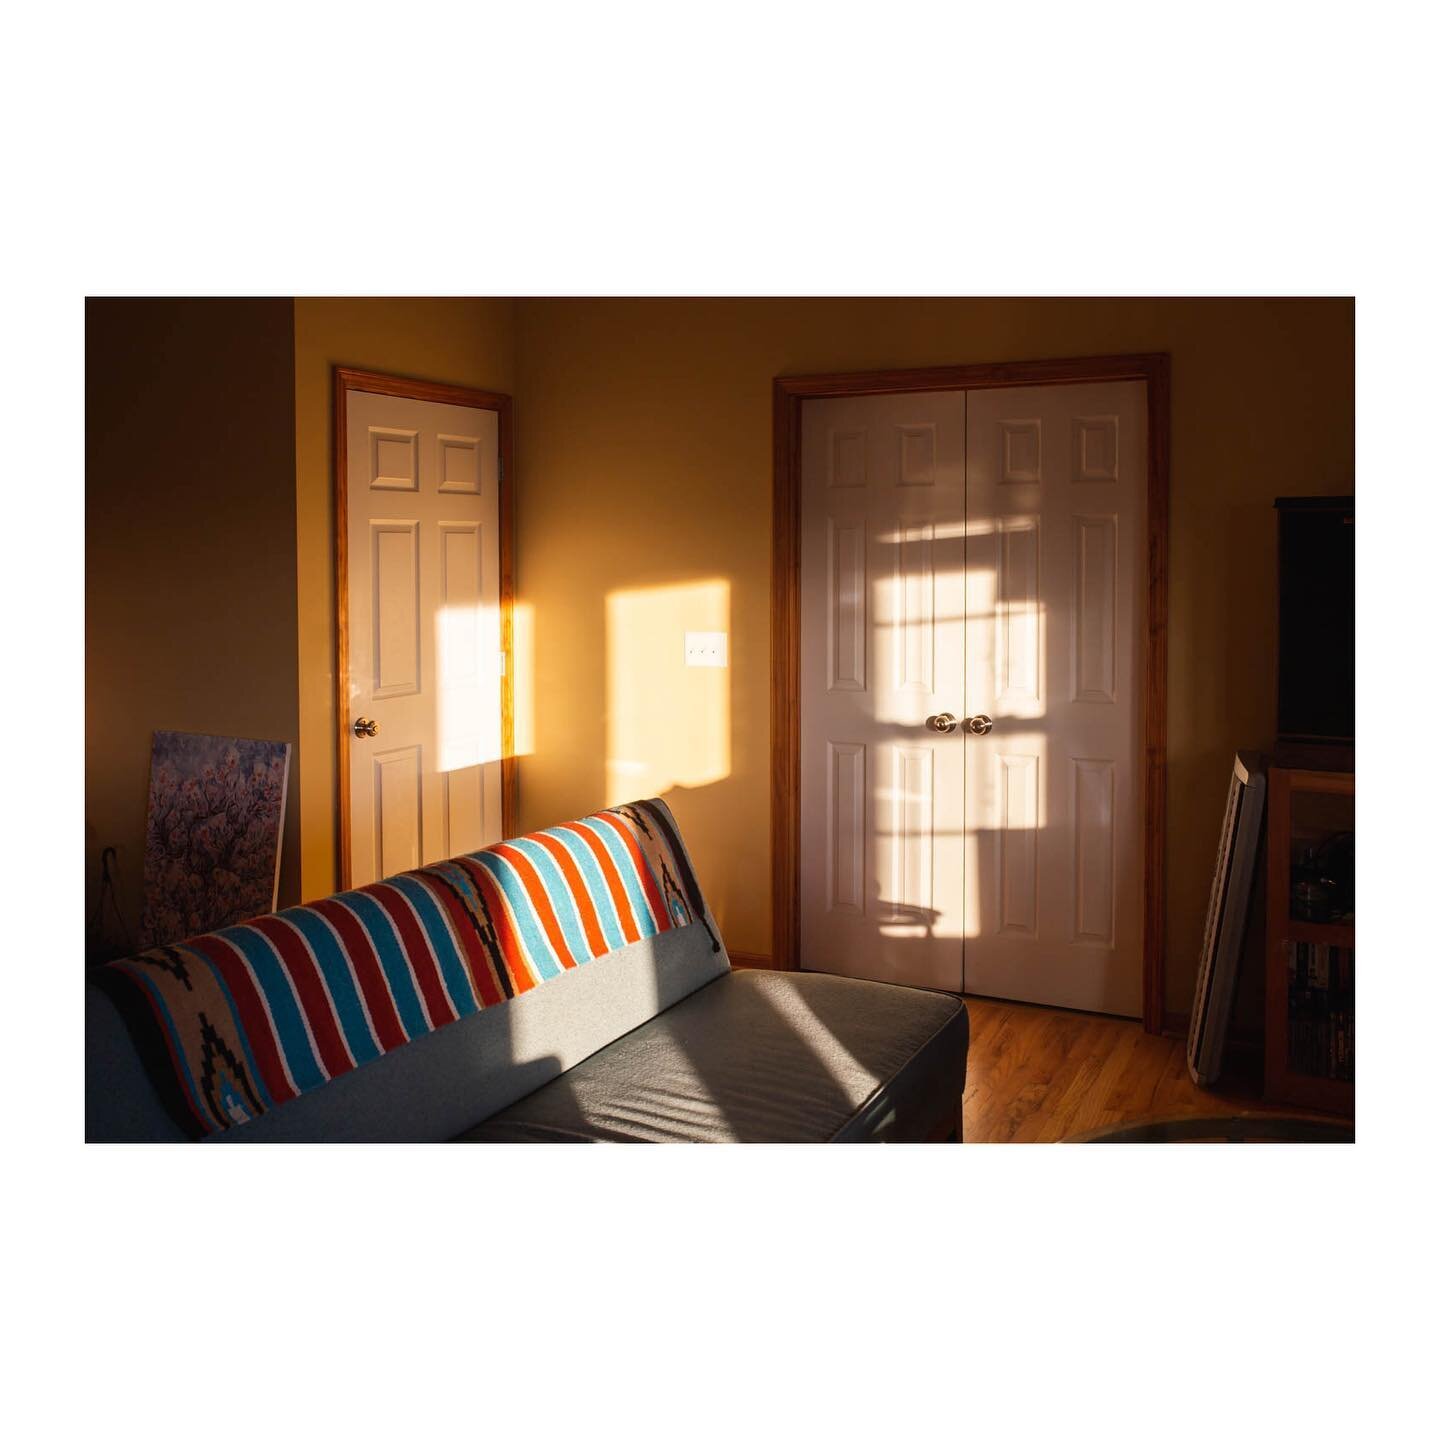 Living room, February 2021 &bull;

I was part of a wonderful virtual photo practice group the last five weeks called Anatomy of a Home, led by @frances_bukovsky through @lifeatsixfeet. We explored making photographs within the boundary of a different